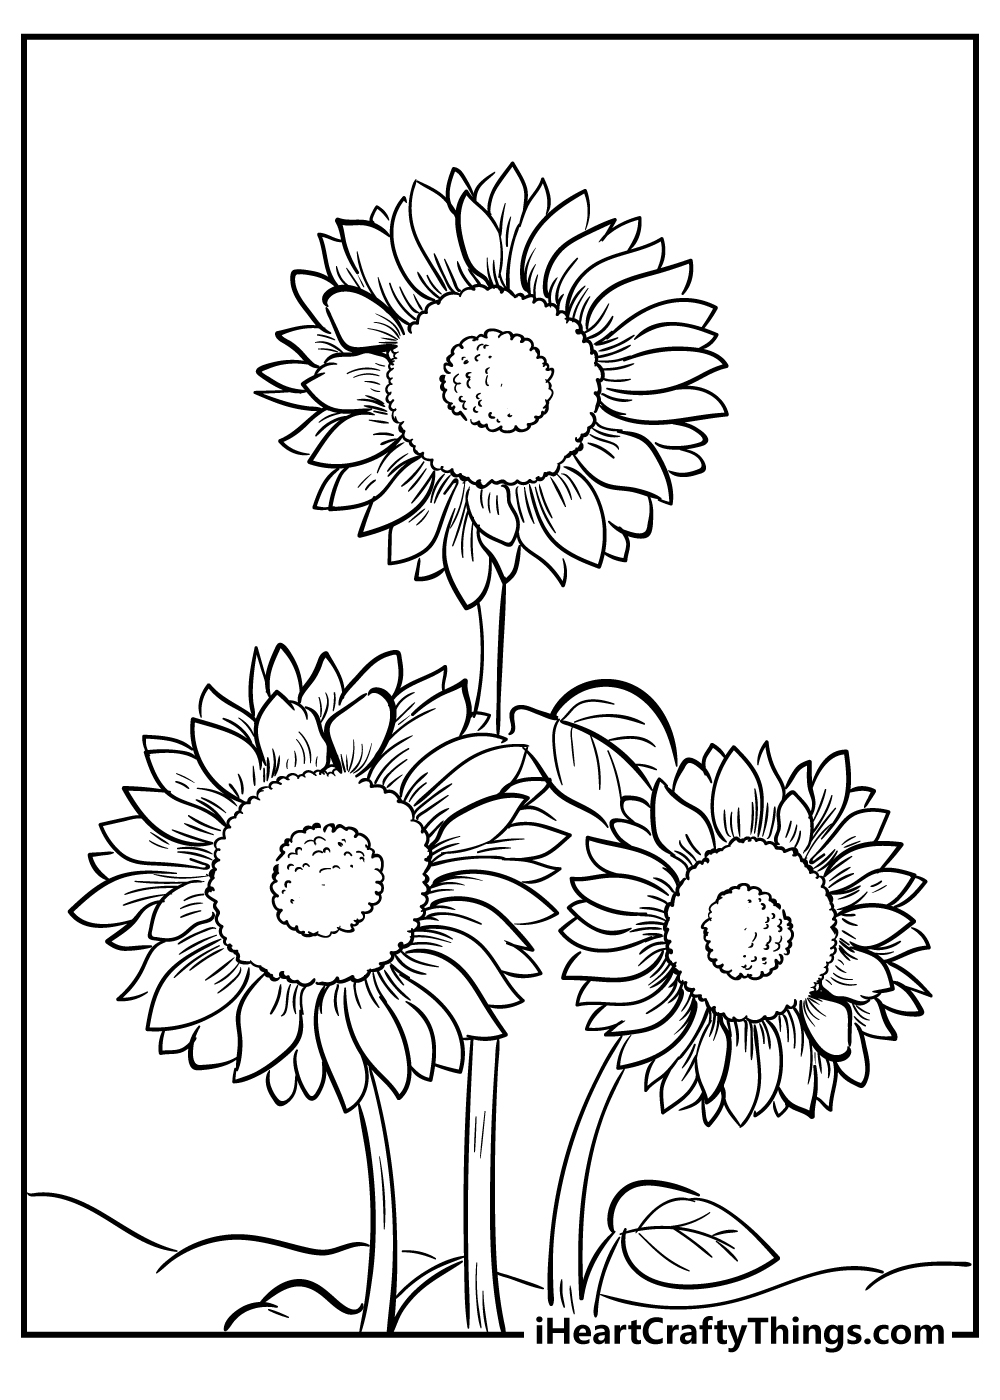 Sunflower Coloring Pages free printable